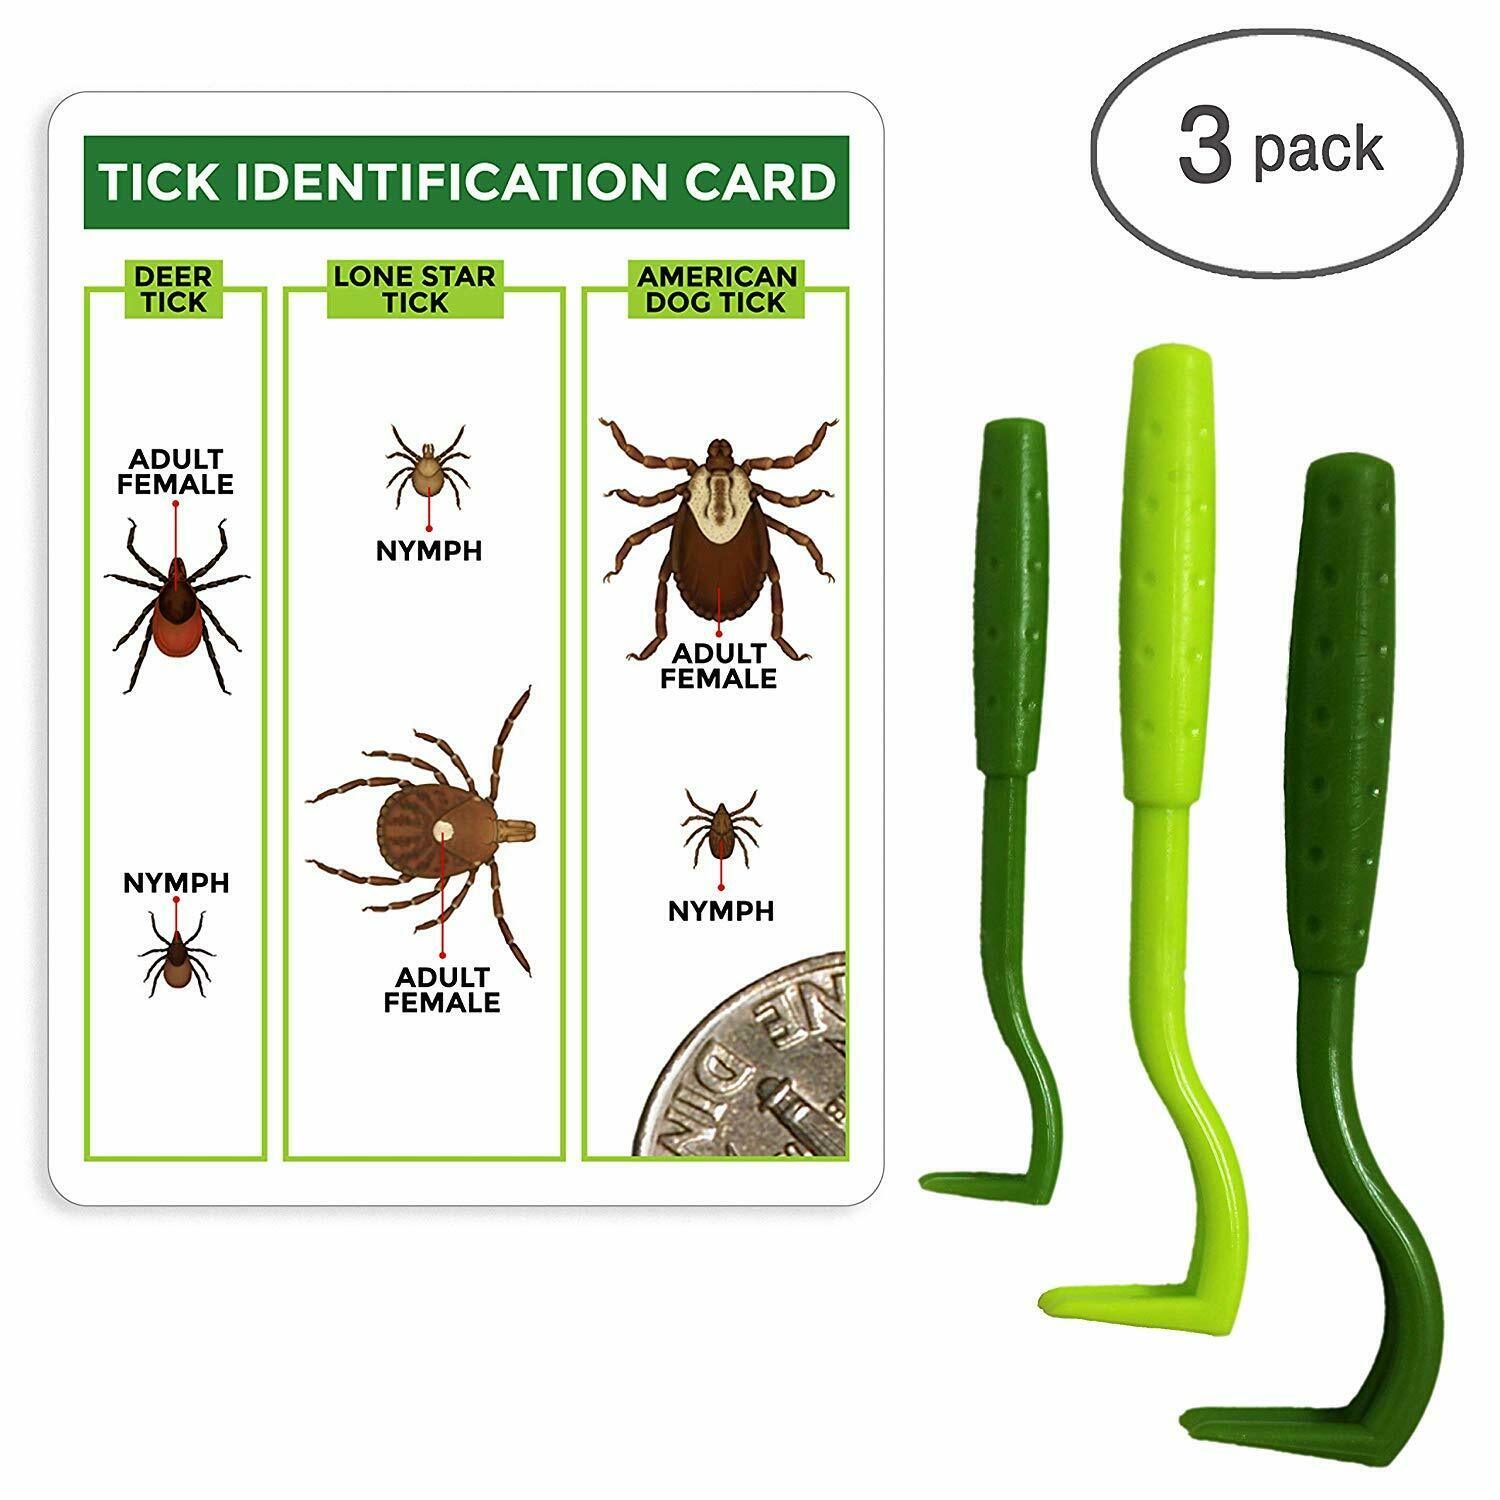 Tickcheck Tick Remover Value 3 Pack - Tick Remover Tools